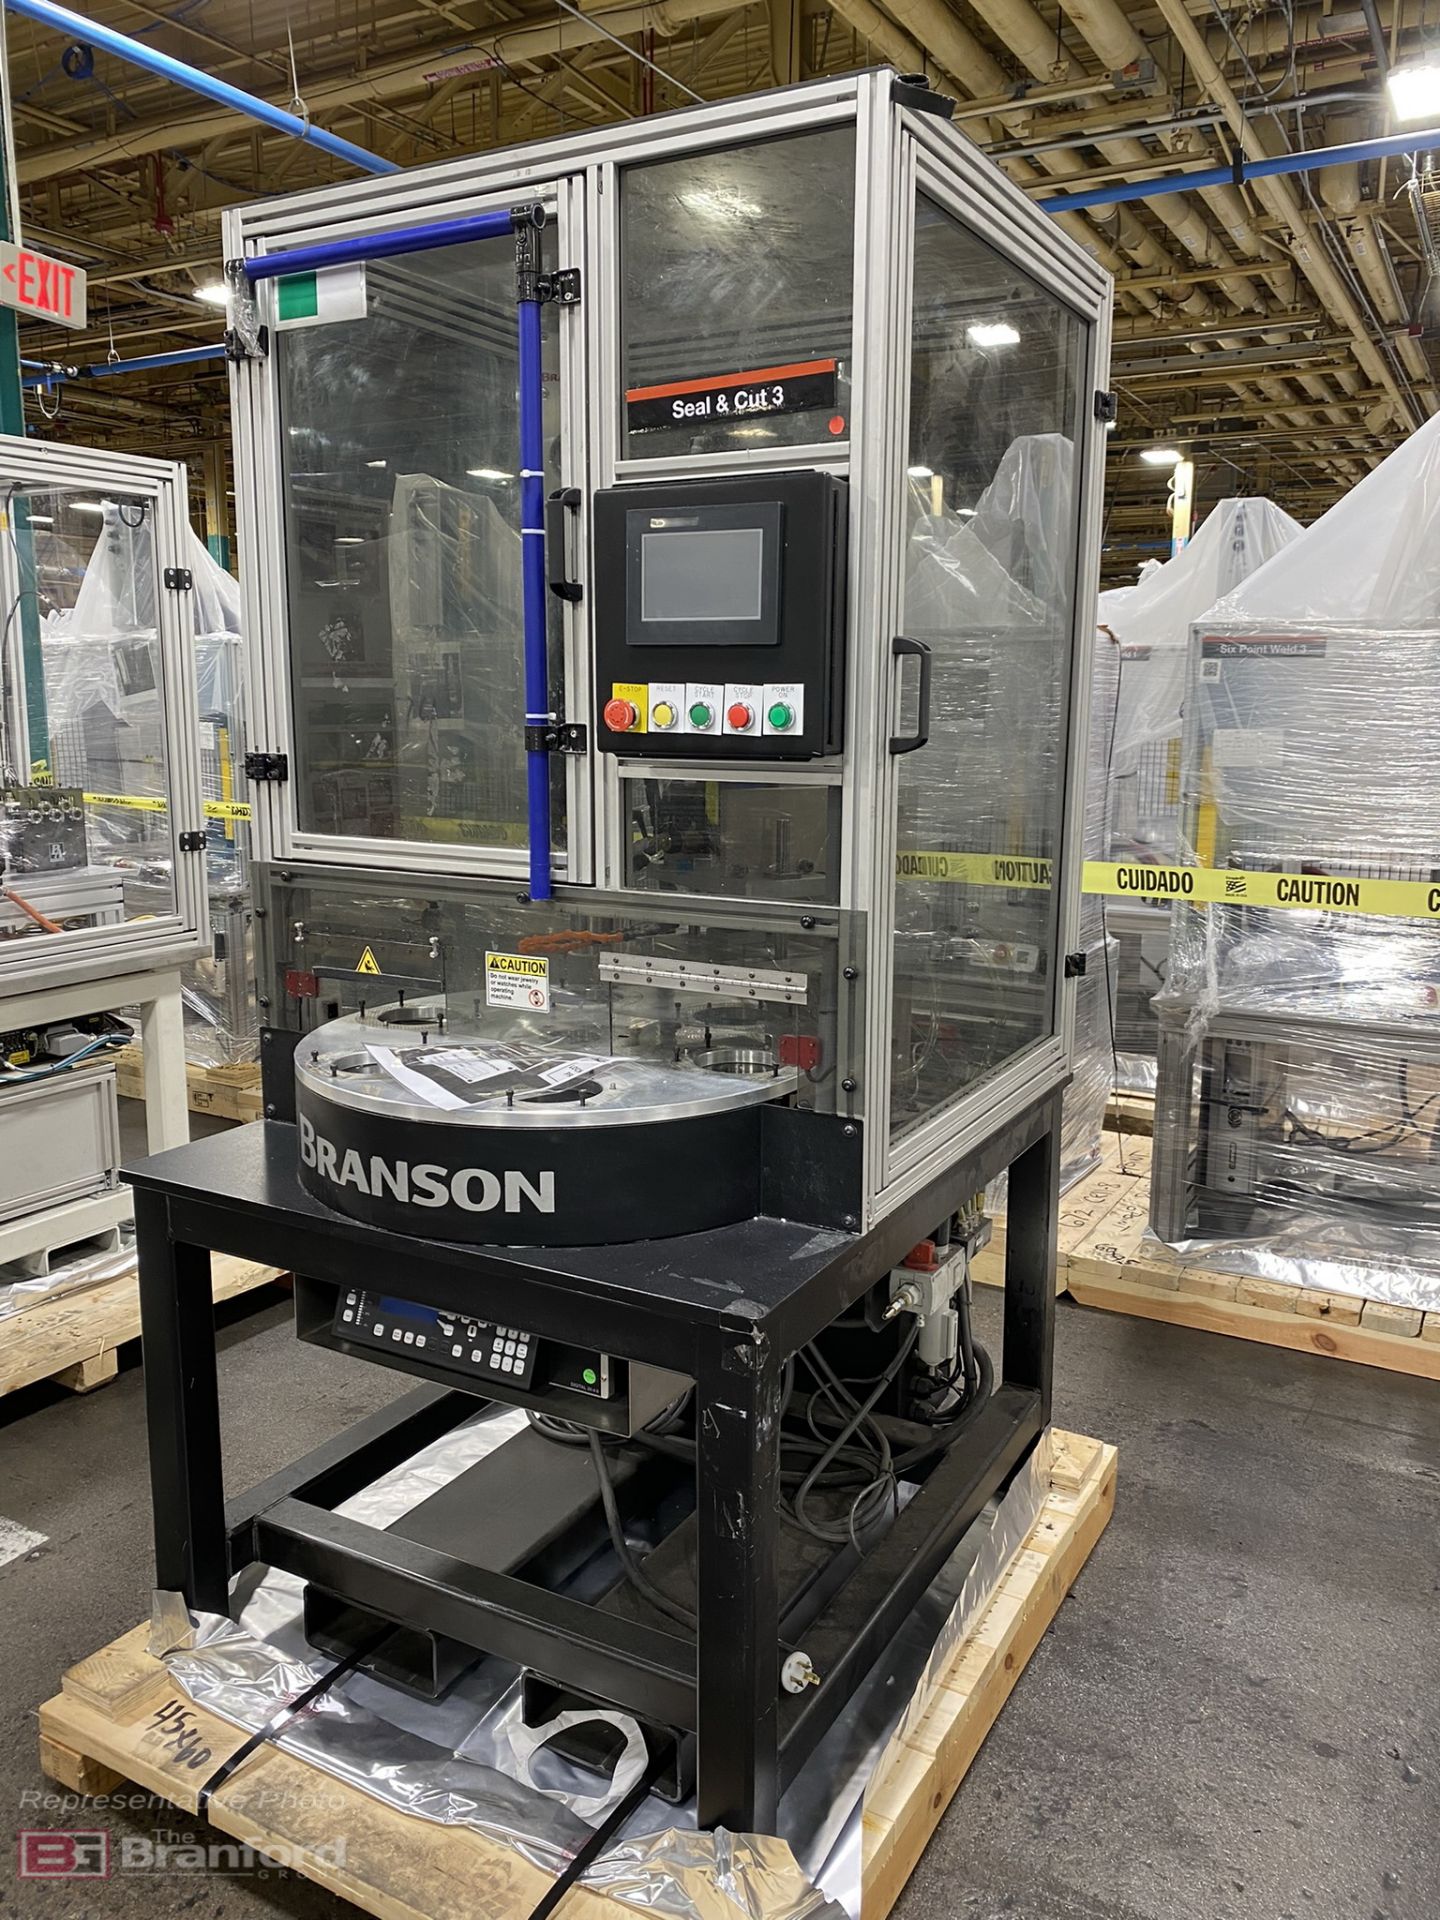 Branson 2000X Series 40 Rotary 'Seal and Cut' Ultrasonic Plastic Welding Assembly System (2020) - Image 4 of 11